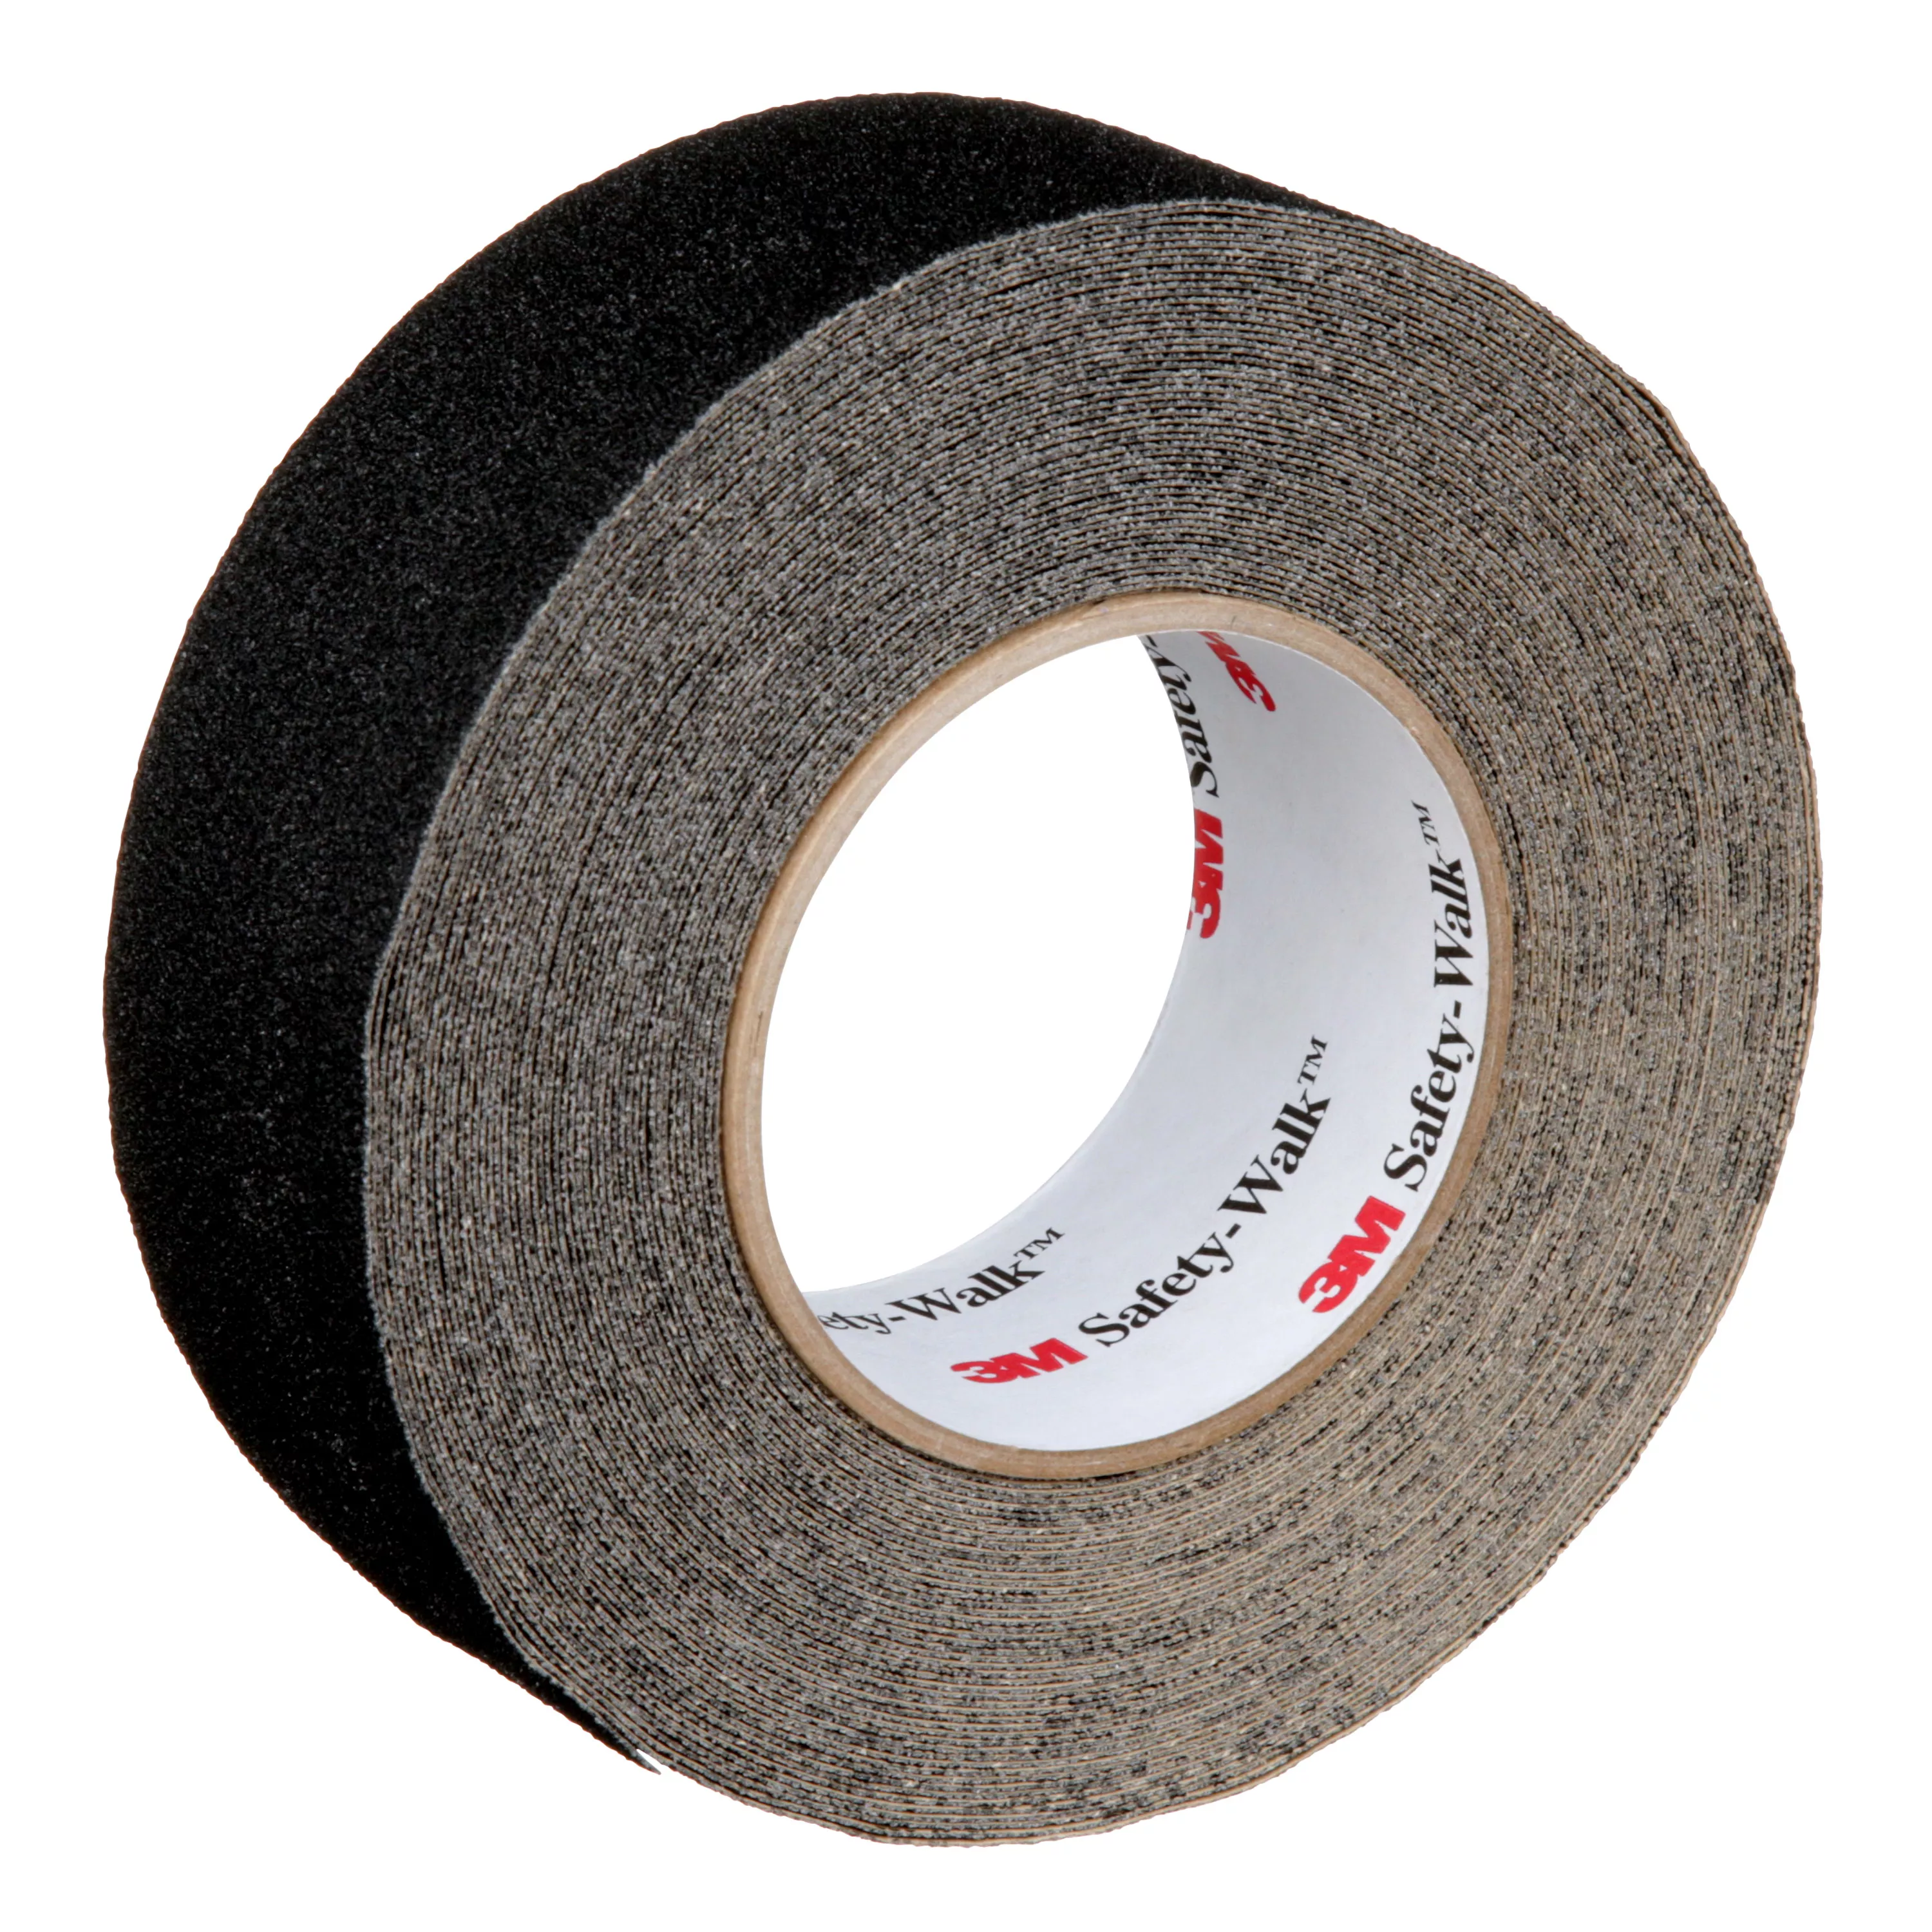 3M™ Safety-Walk™ Slip-Resistant General Purpose Tapes & Treads 610,
Black, 2 in x 60 ft, Roll, 2/Case